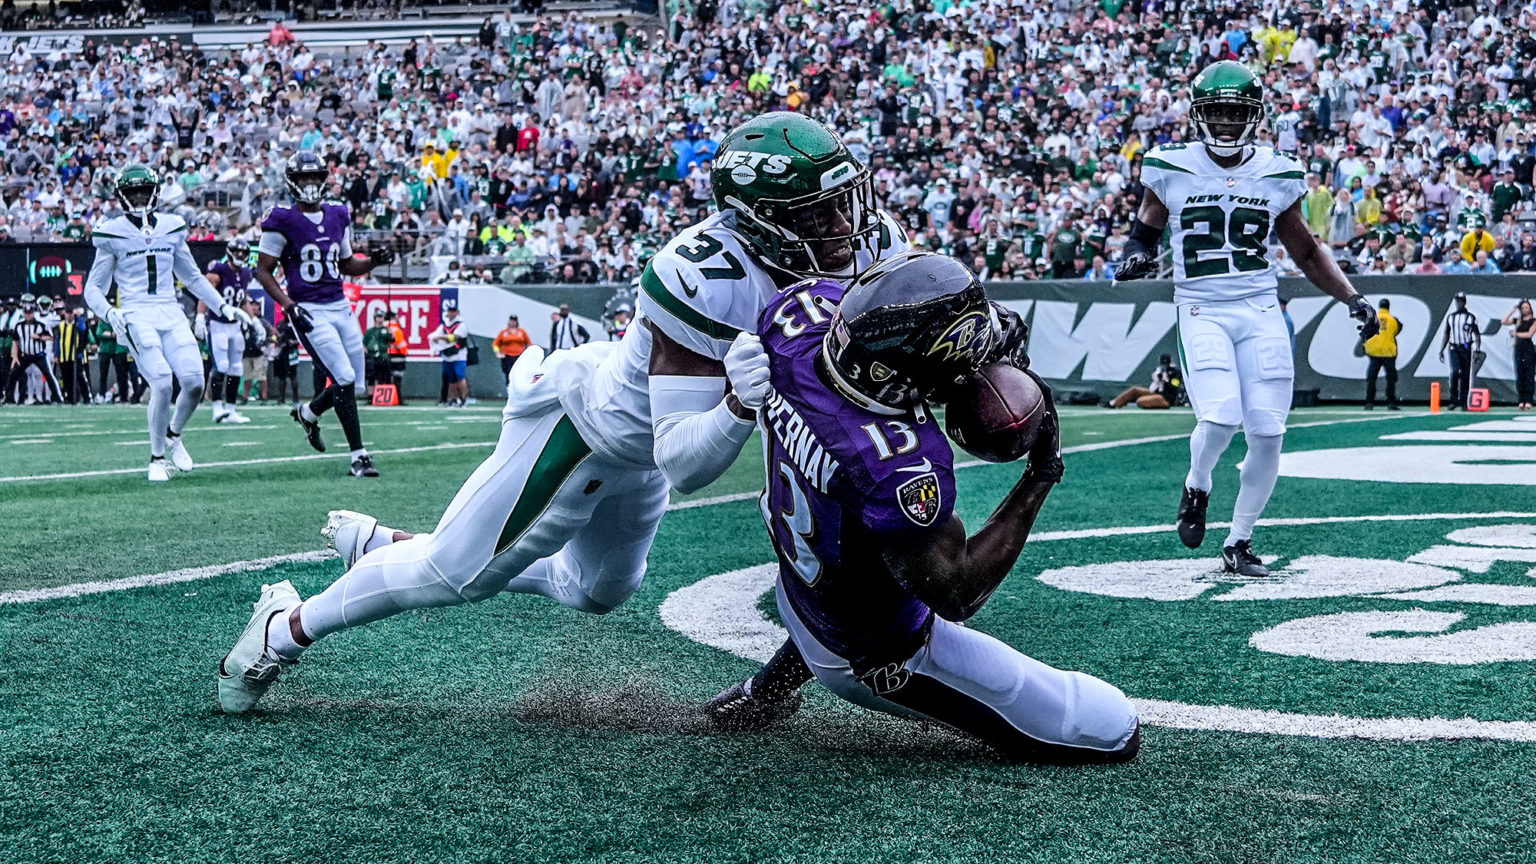 After solid start, NY Jets flame out against Baltimore Ravens, 243